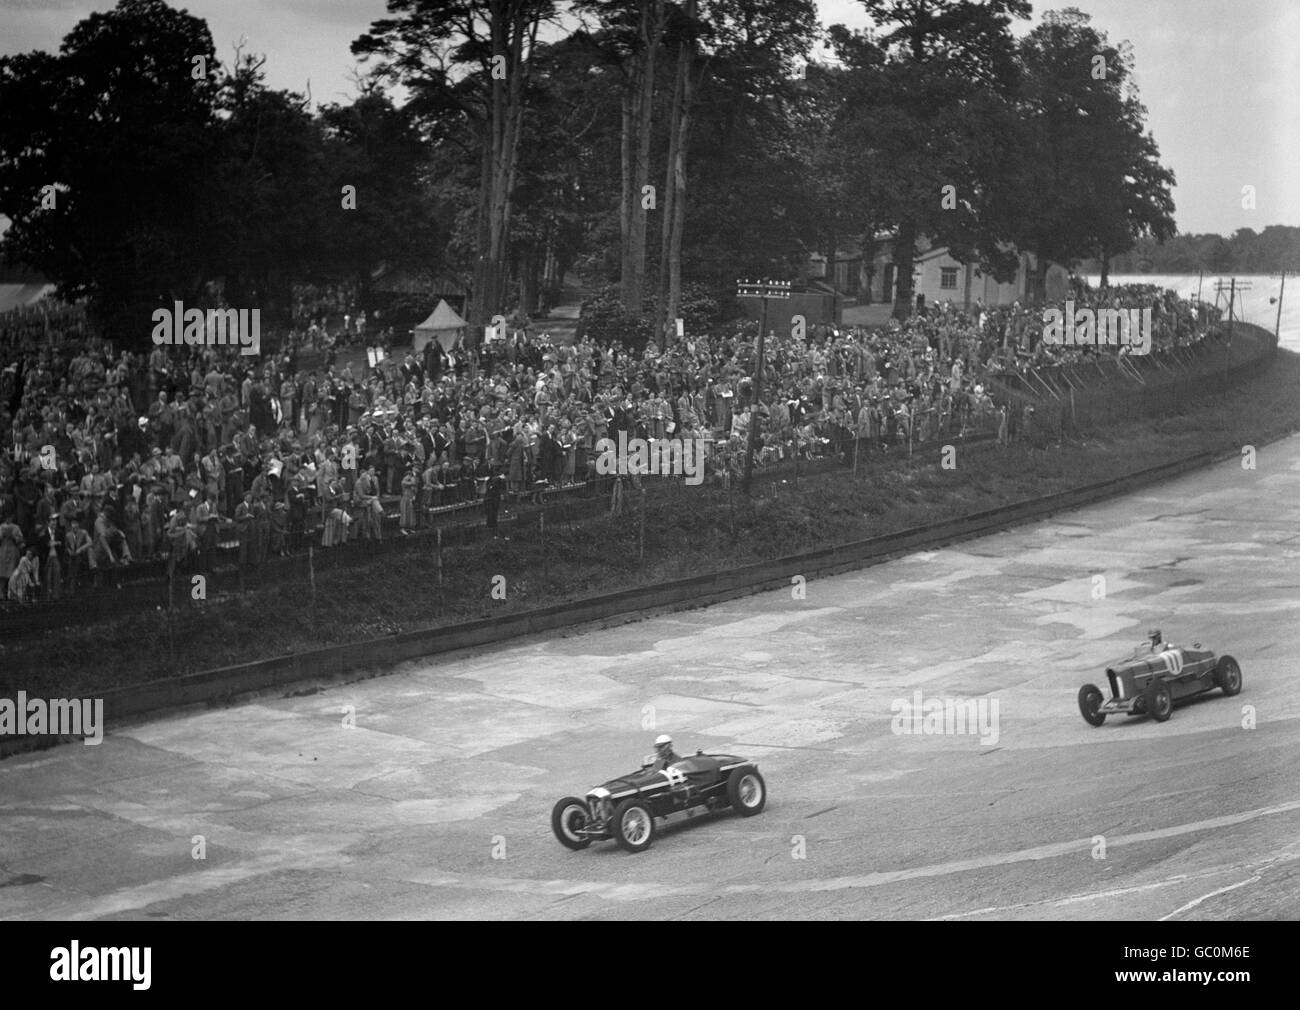 F.C Monkhouse (14) in an Amilcar, and Donald Letts (11) in an MG, on the Mountain Course at Brooklands. Stock Photo